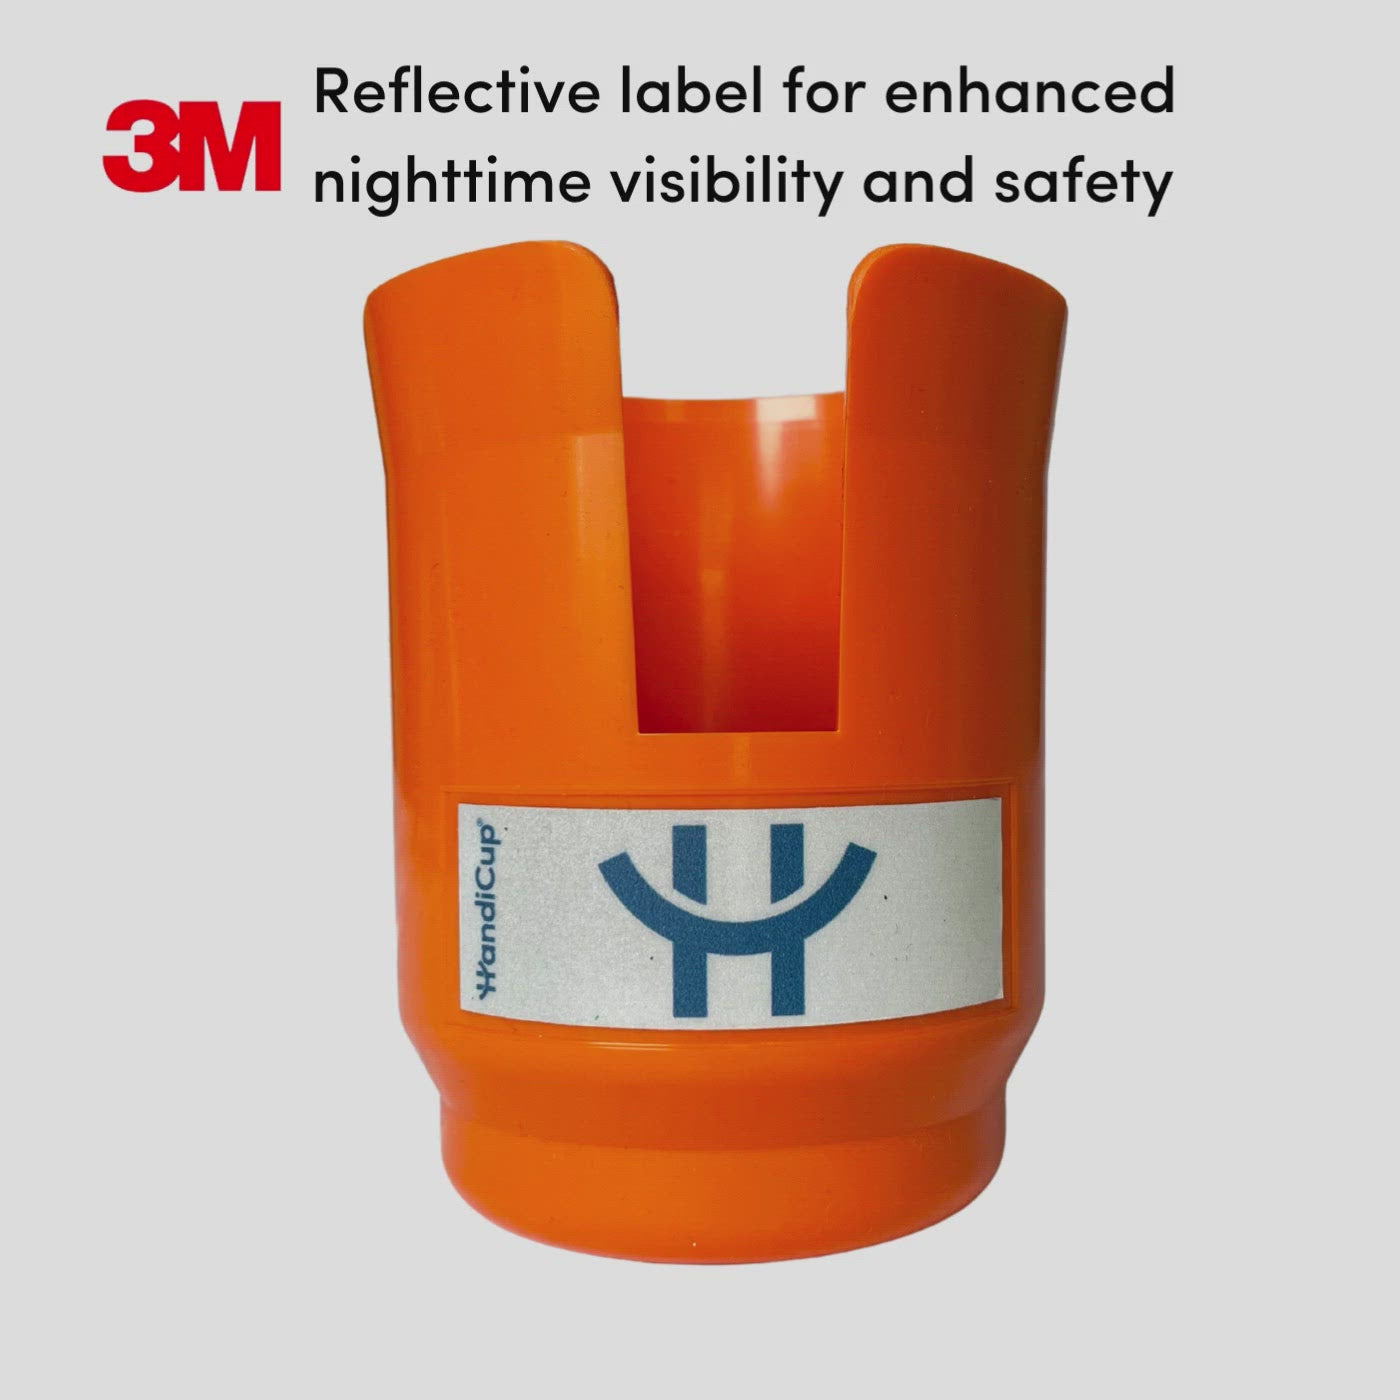 3m reflective label provides enhanced nighttime visibility and safety.